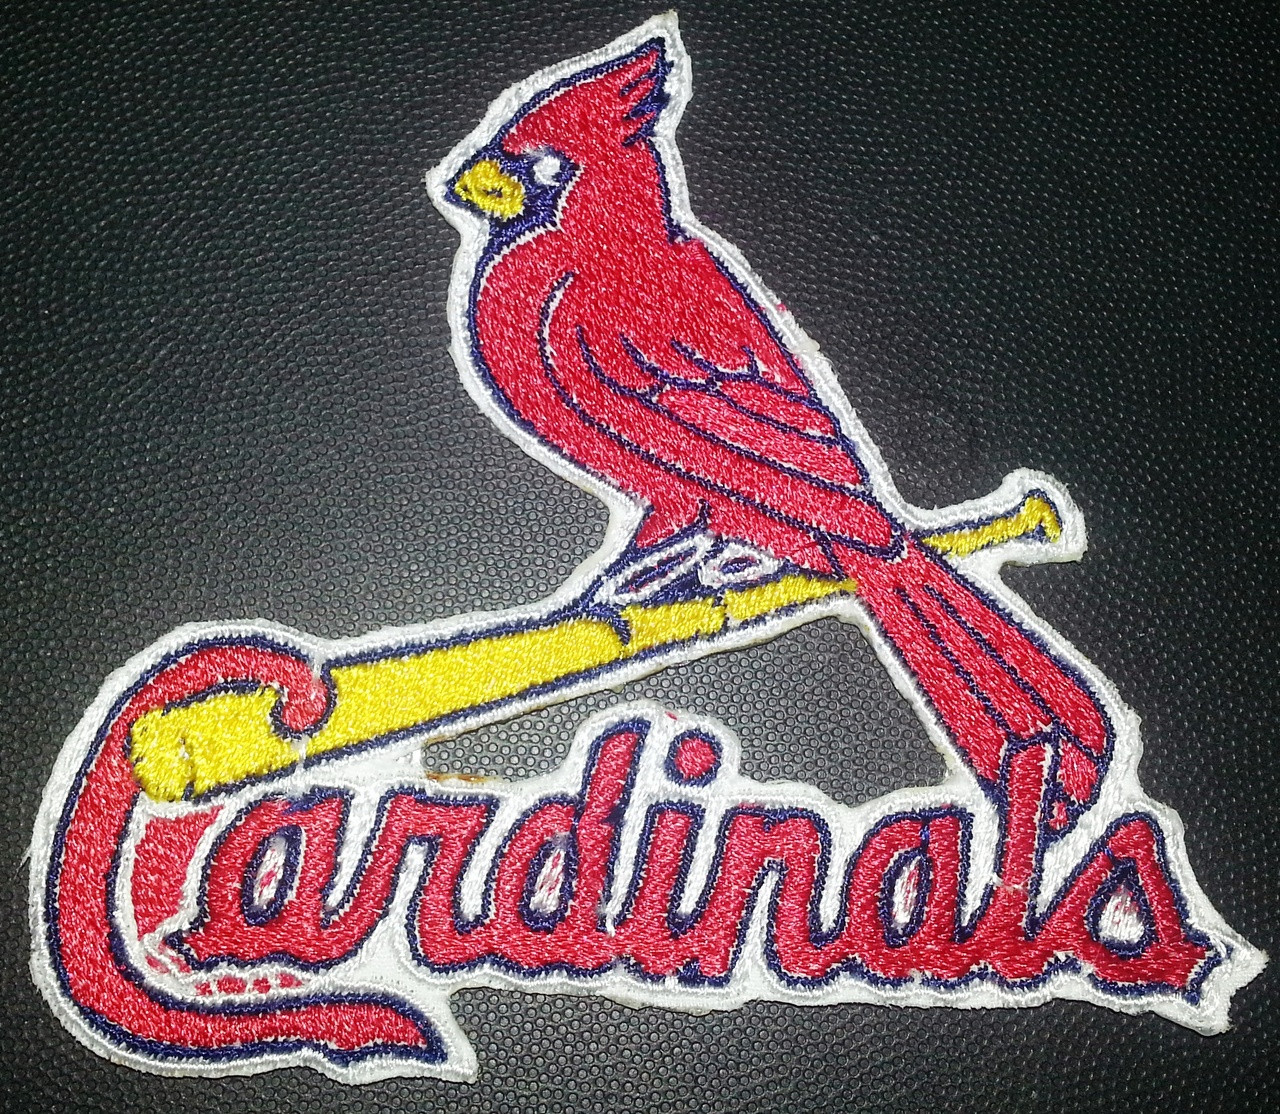 St. Louis Cardinals logo Iron On Patch - Beyond Vision Mall